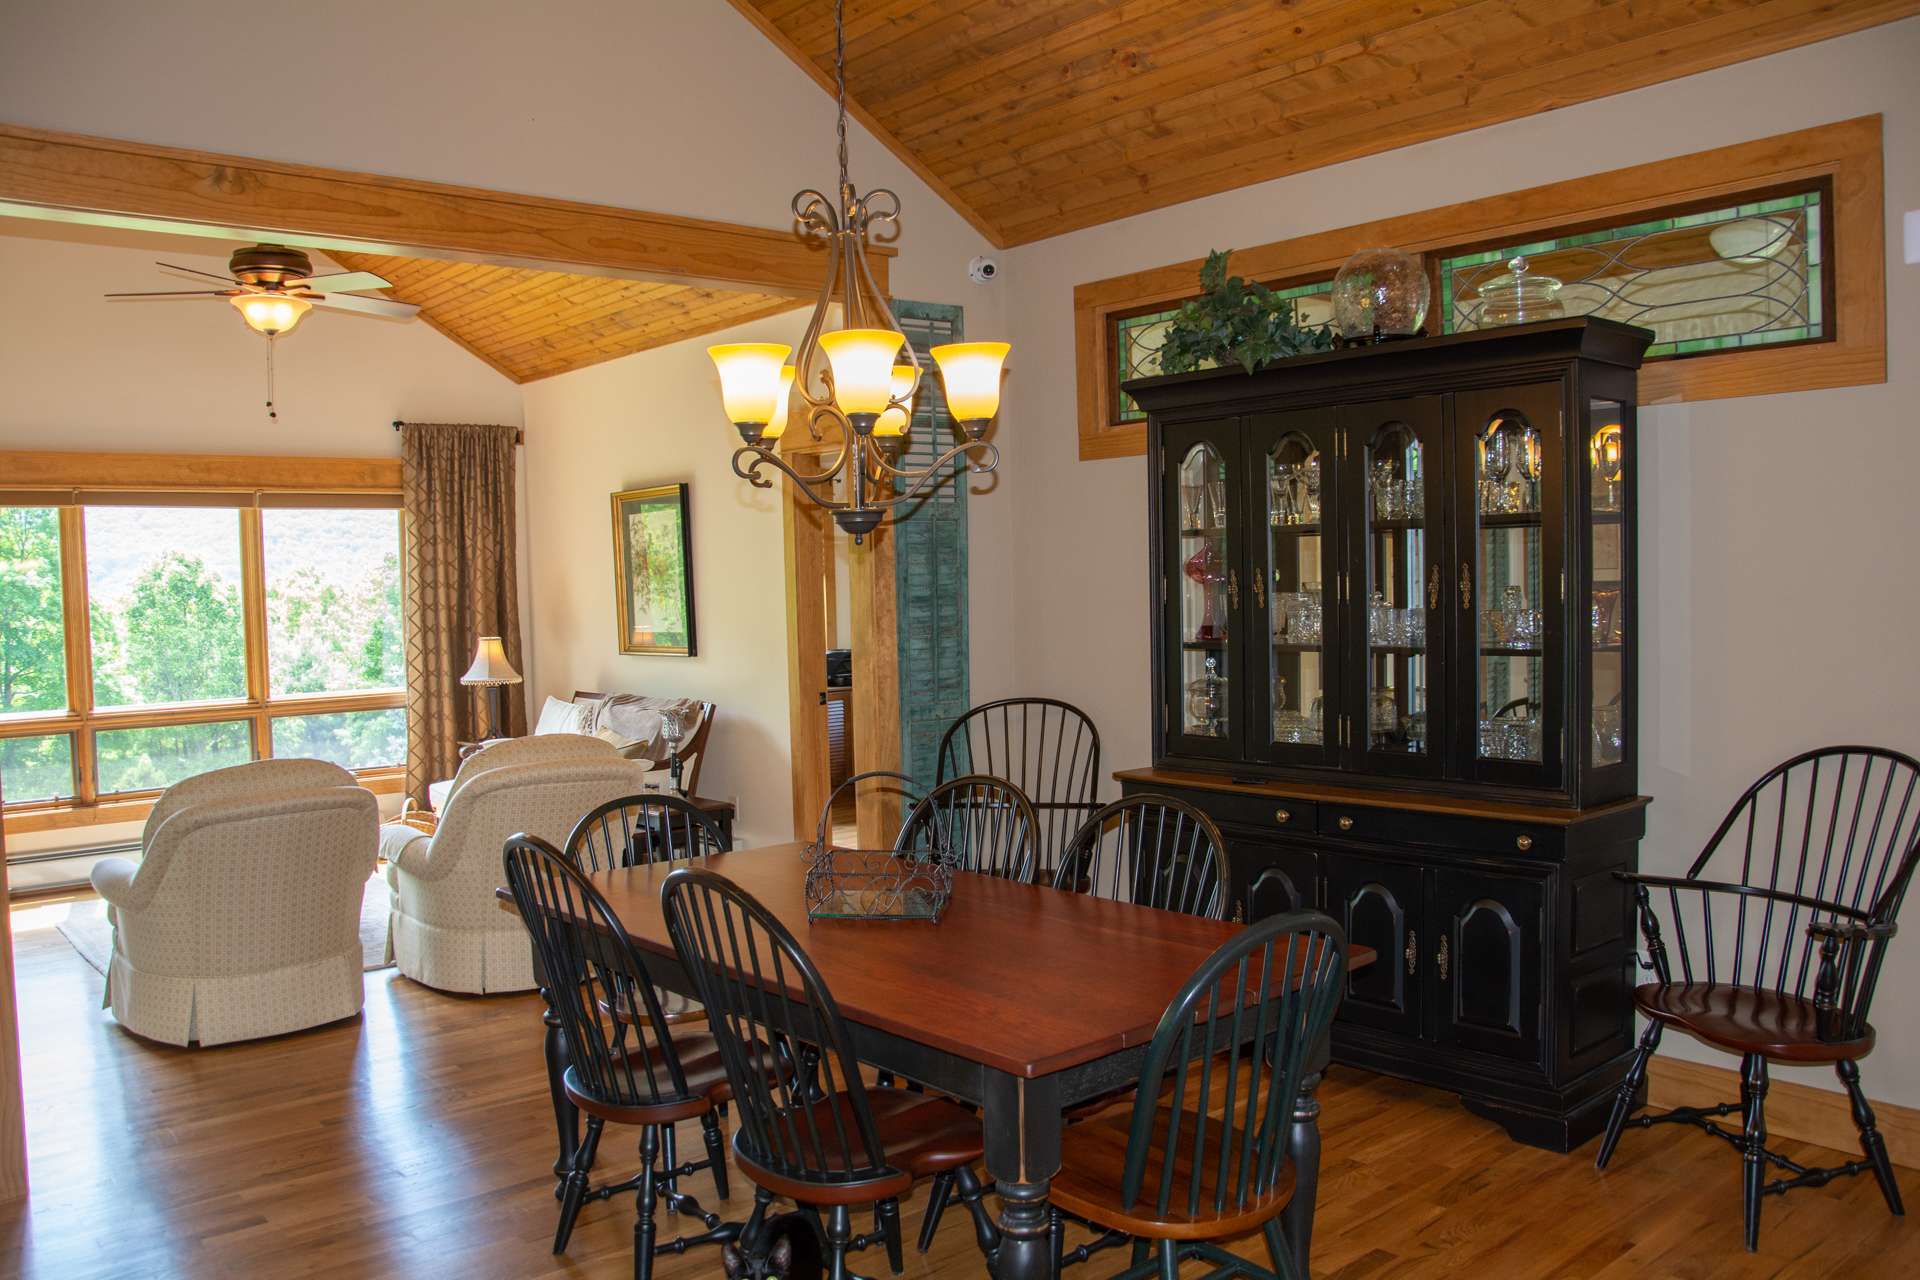 Adjoining the kitchen is a beautiful formal dining area that is also accessed from the den or morning room.